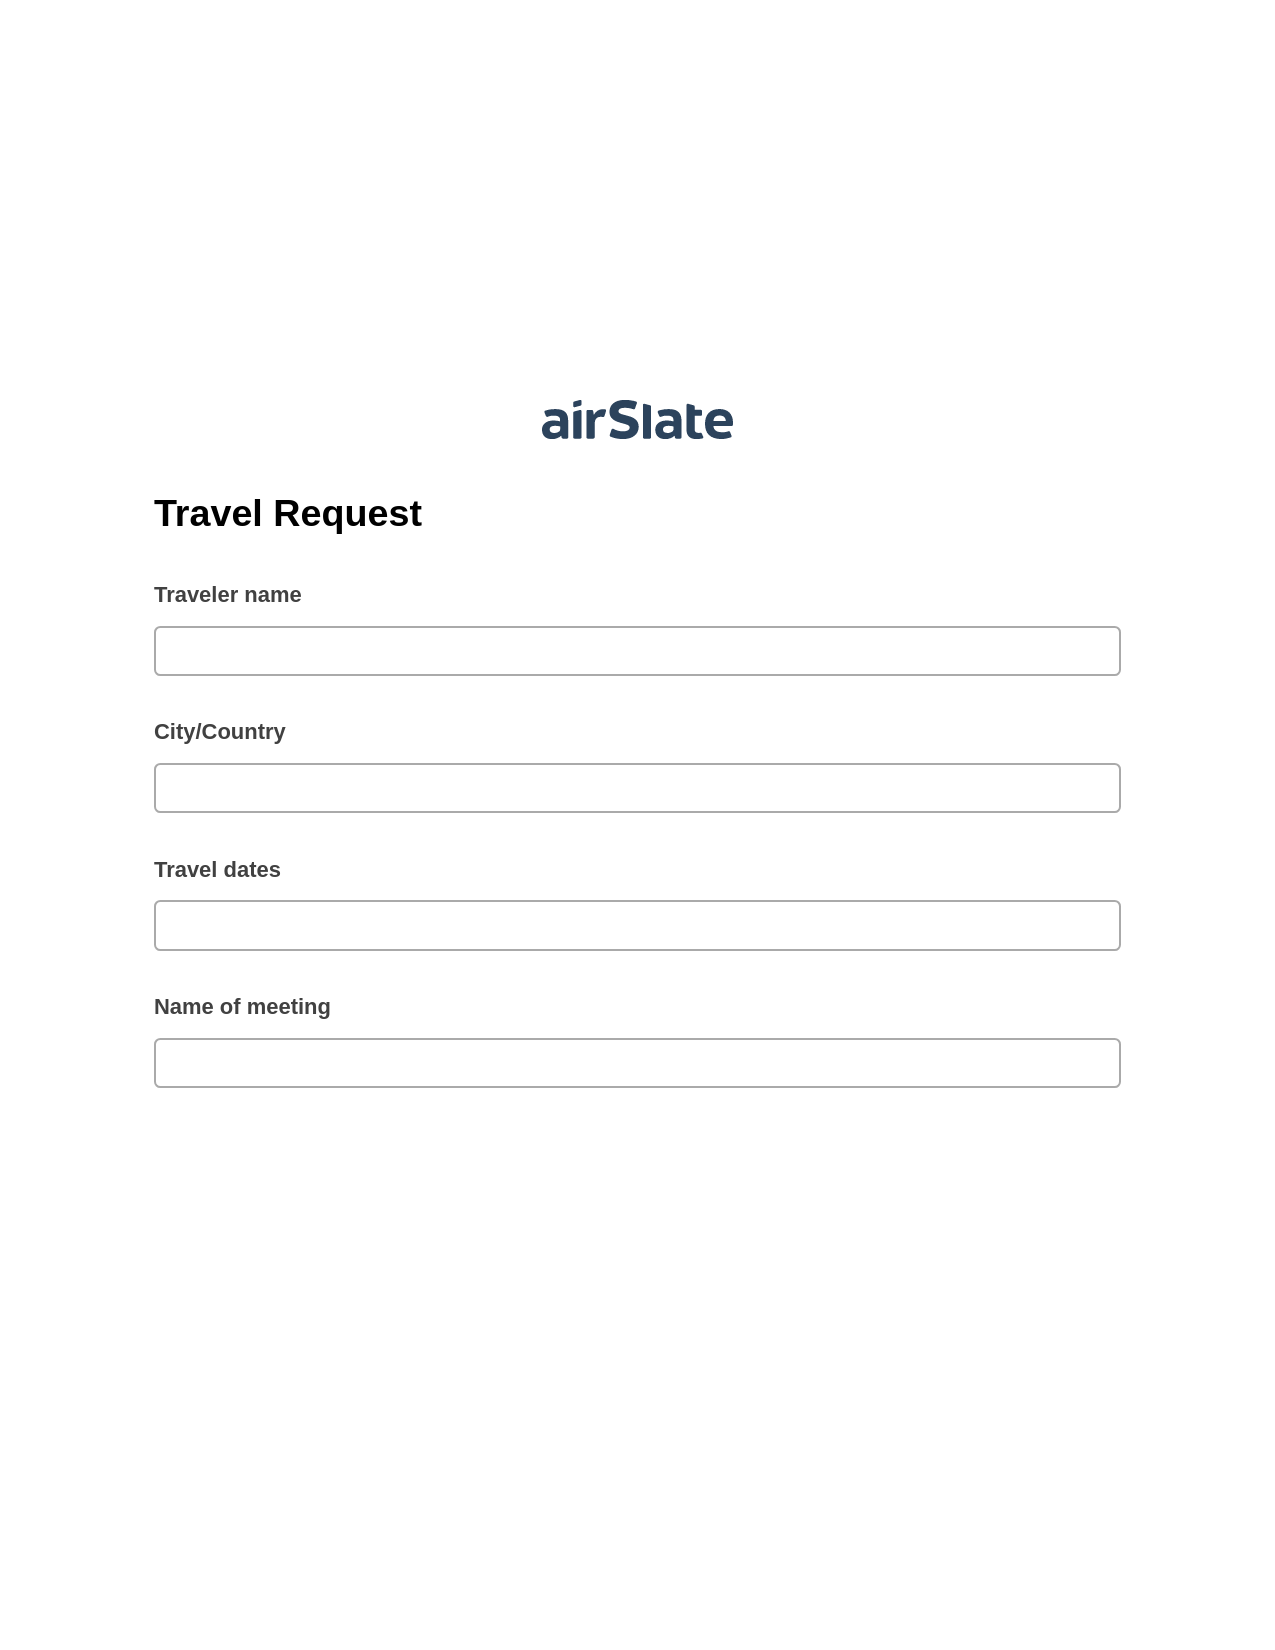 Travel Request Pre-fill Dropdown from Airtable, Update NetSuite Records Bot, Export to Excel 365 Bot